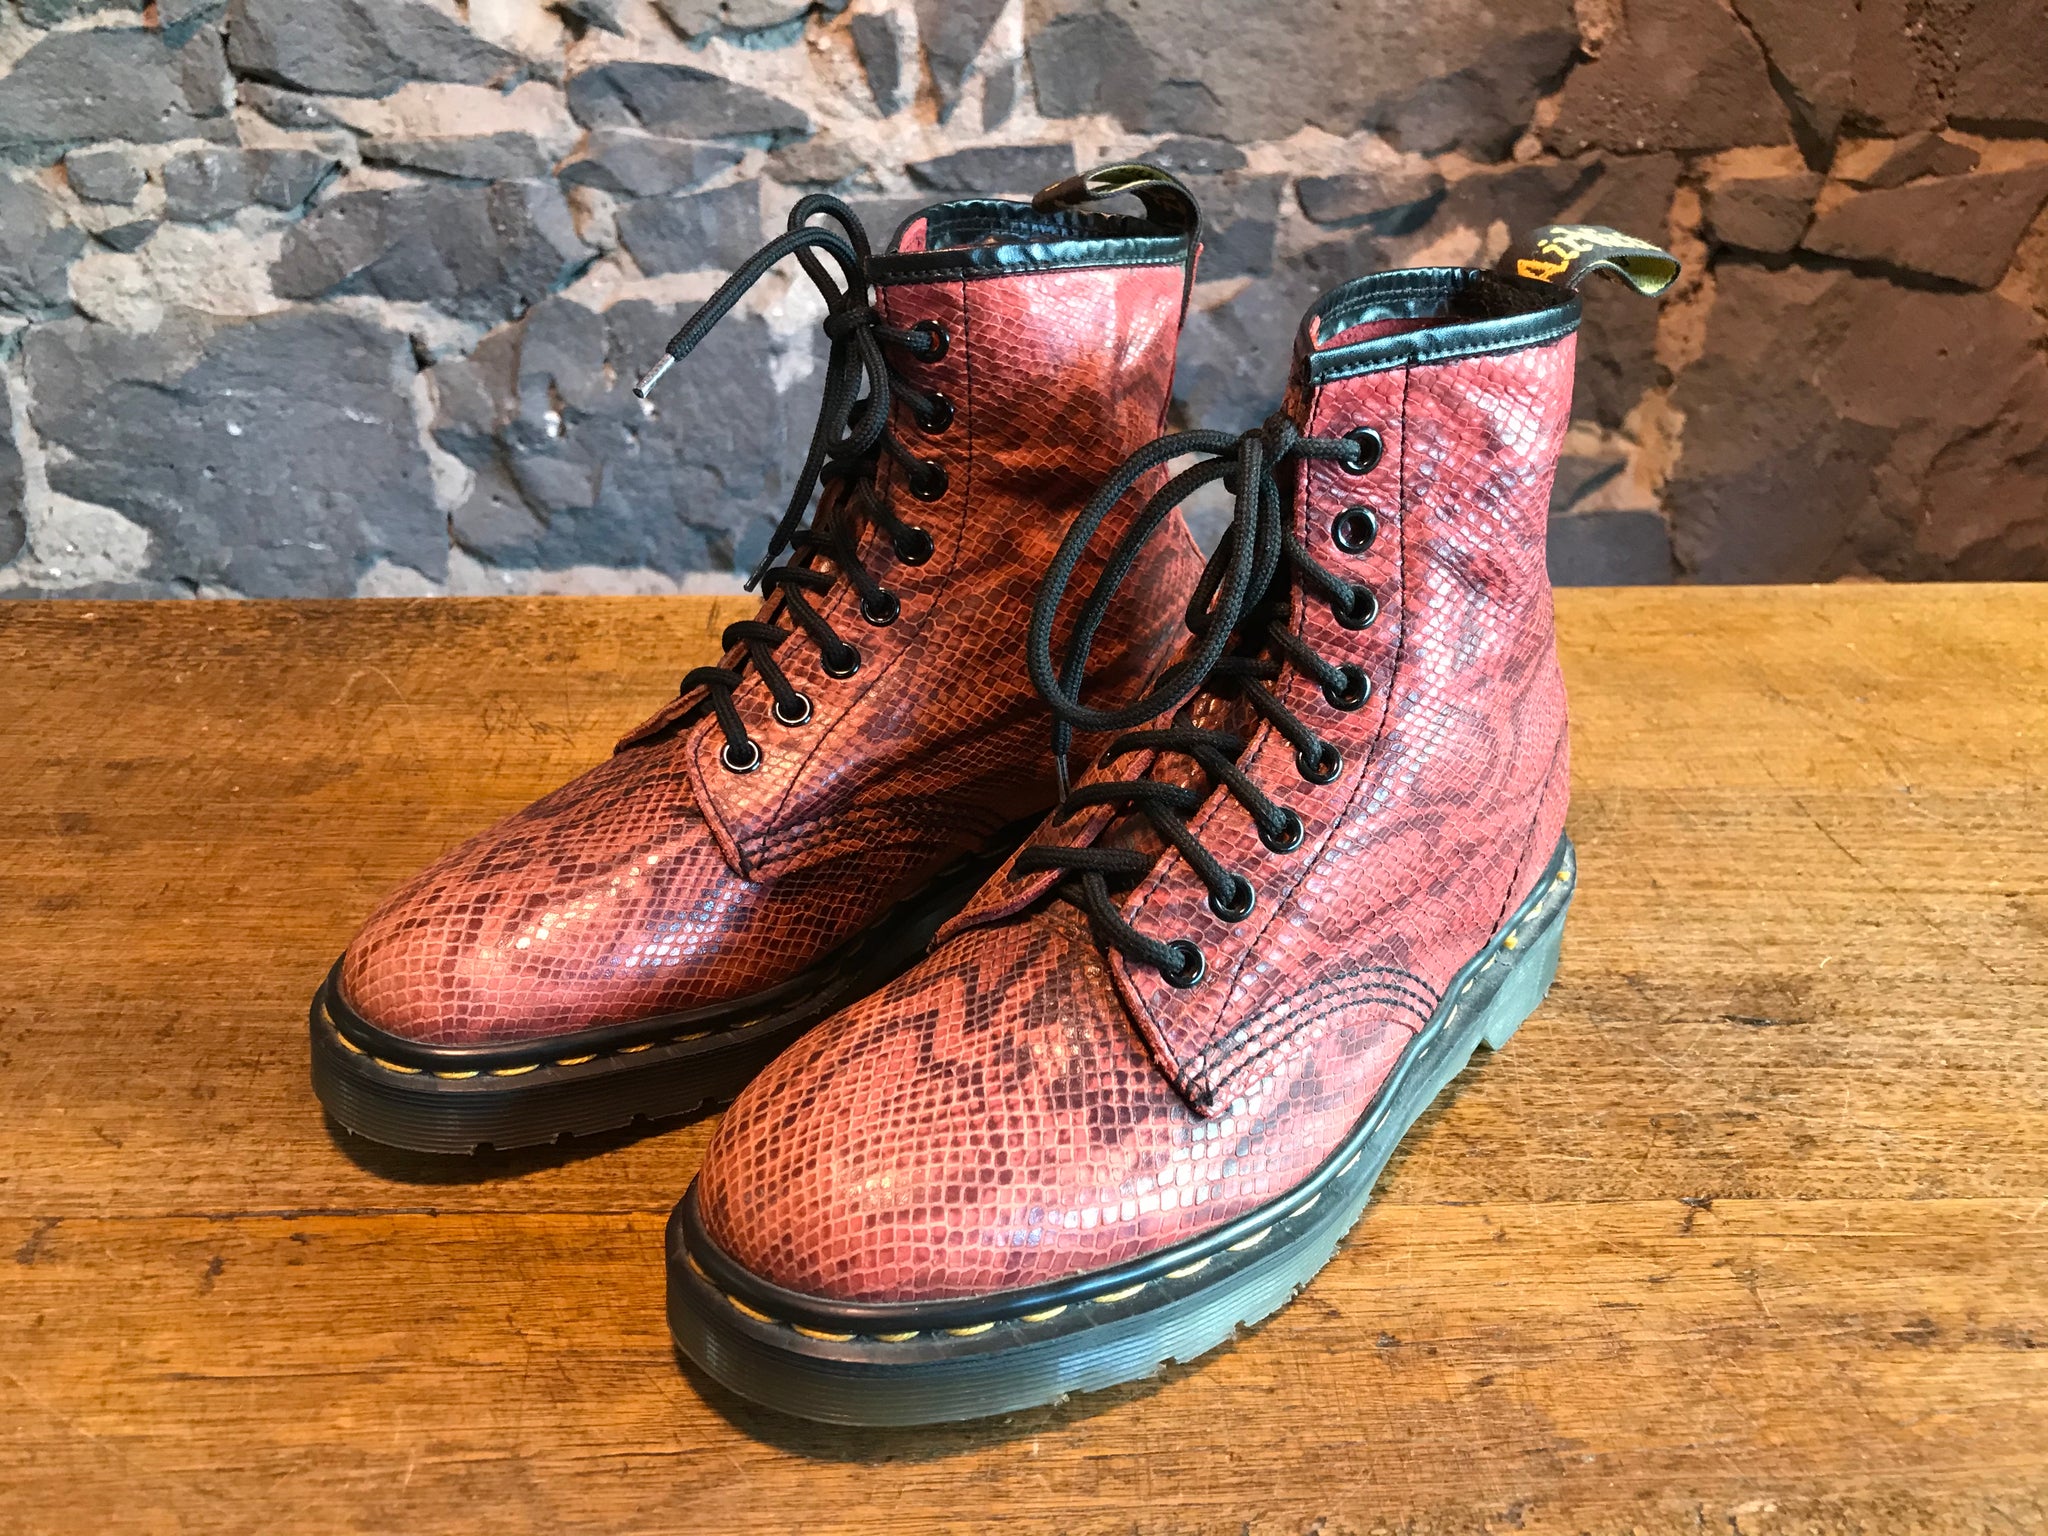 Dr Martens Rare Vintage Dark Red Boatex 1460 Women’s Boots Size UK 6 Made in England